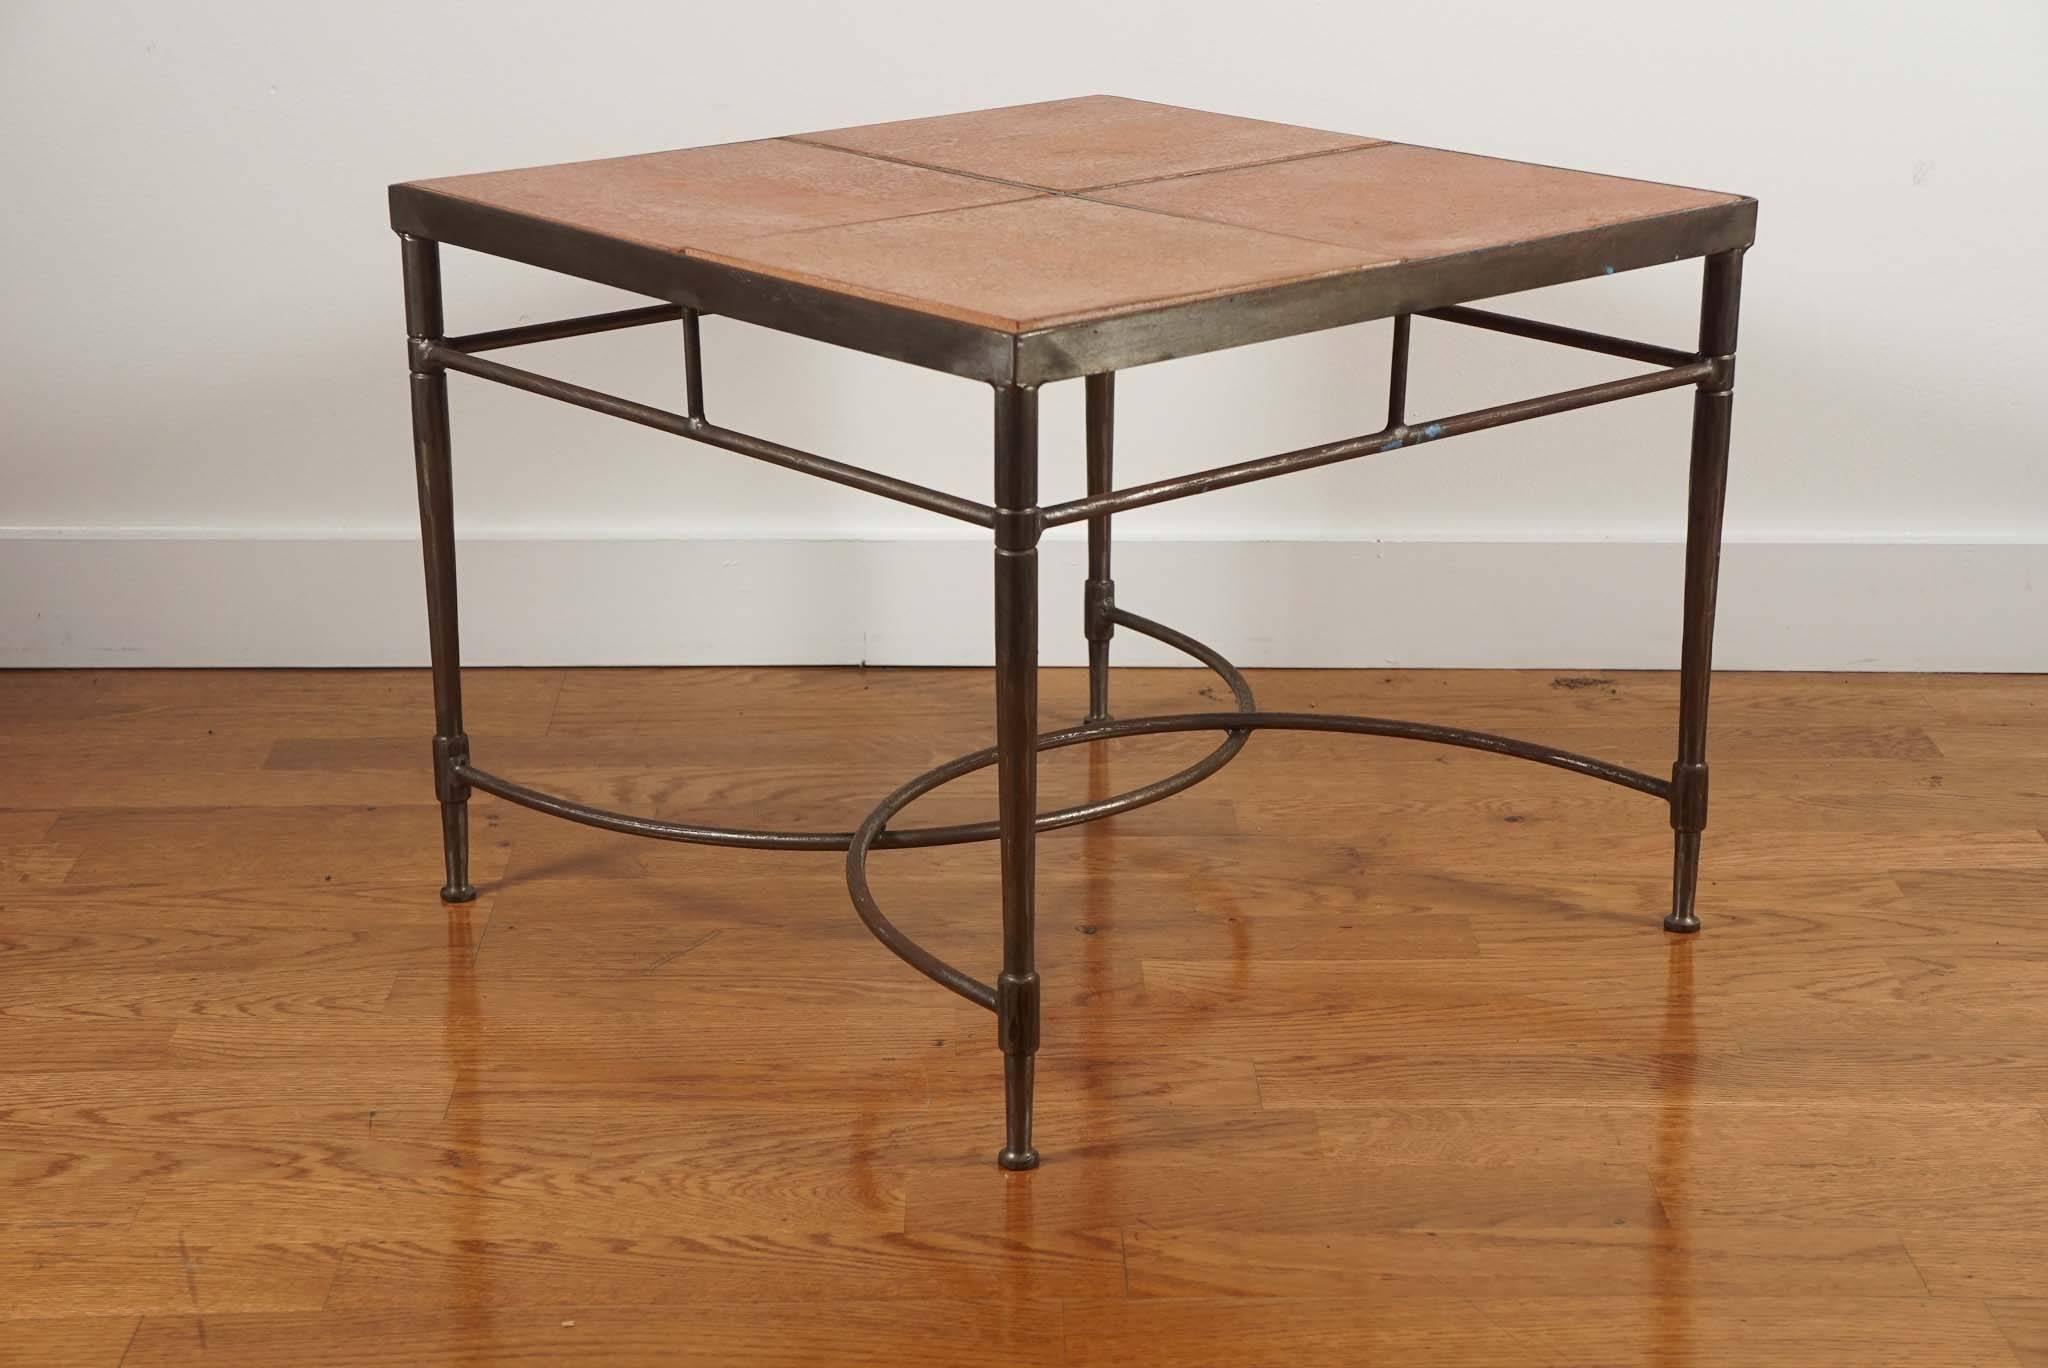 1970s steel base side table, with inset tile top.